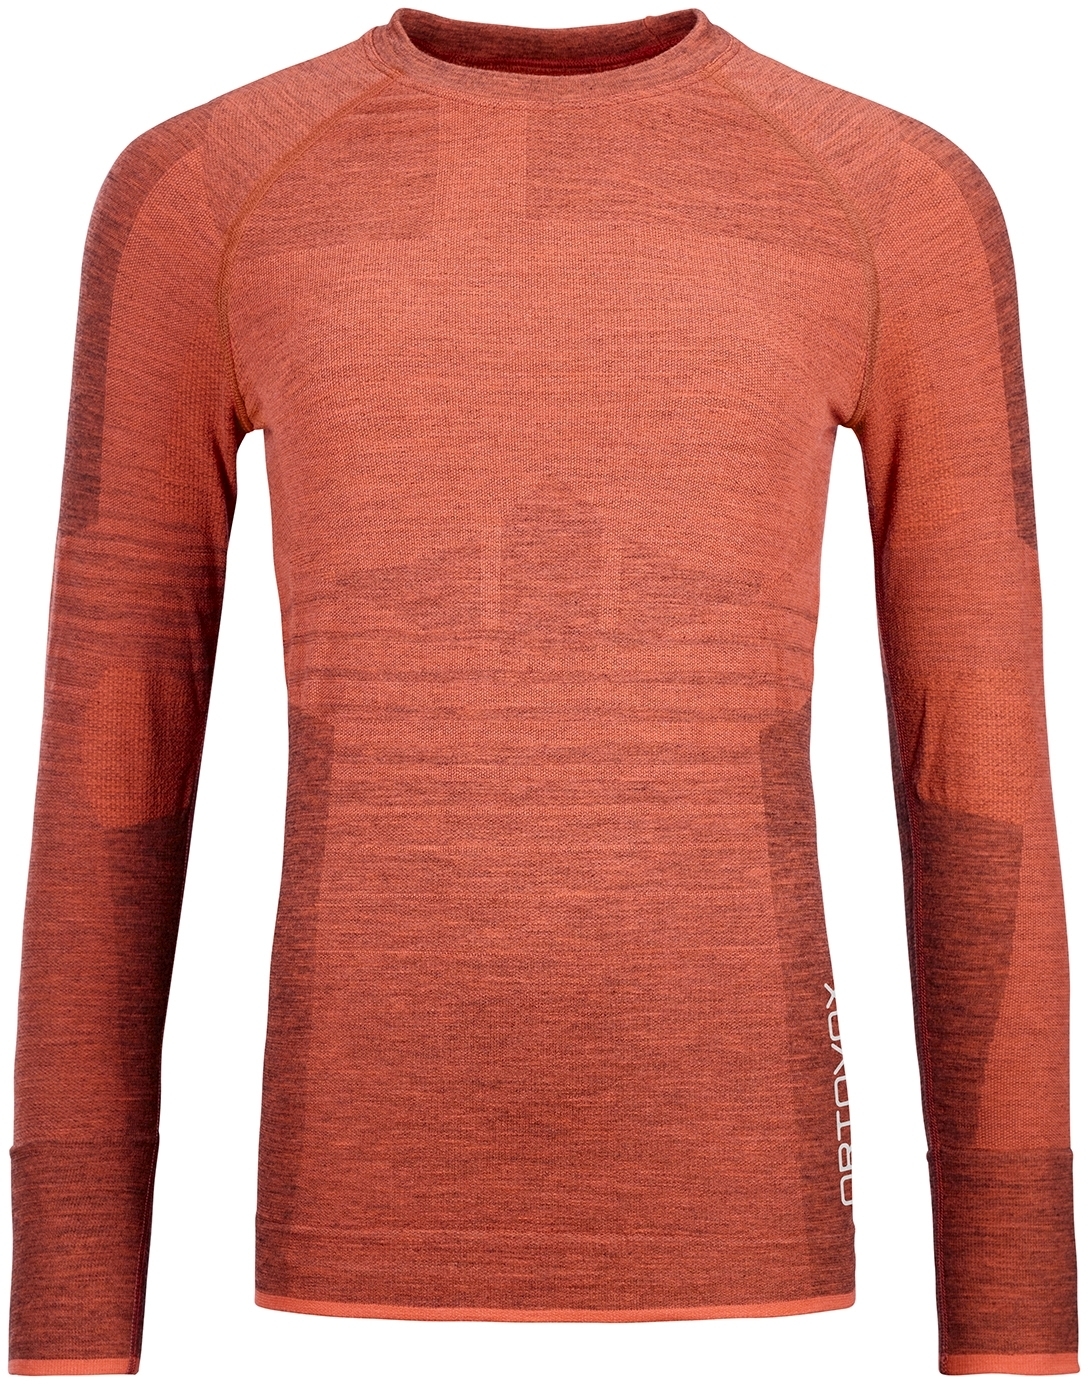 E-shop Ortovox 230 competition long sleeve w - coral L